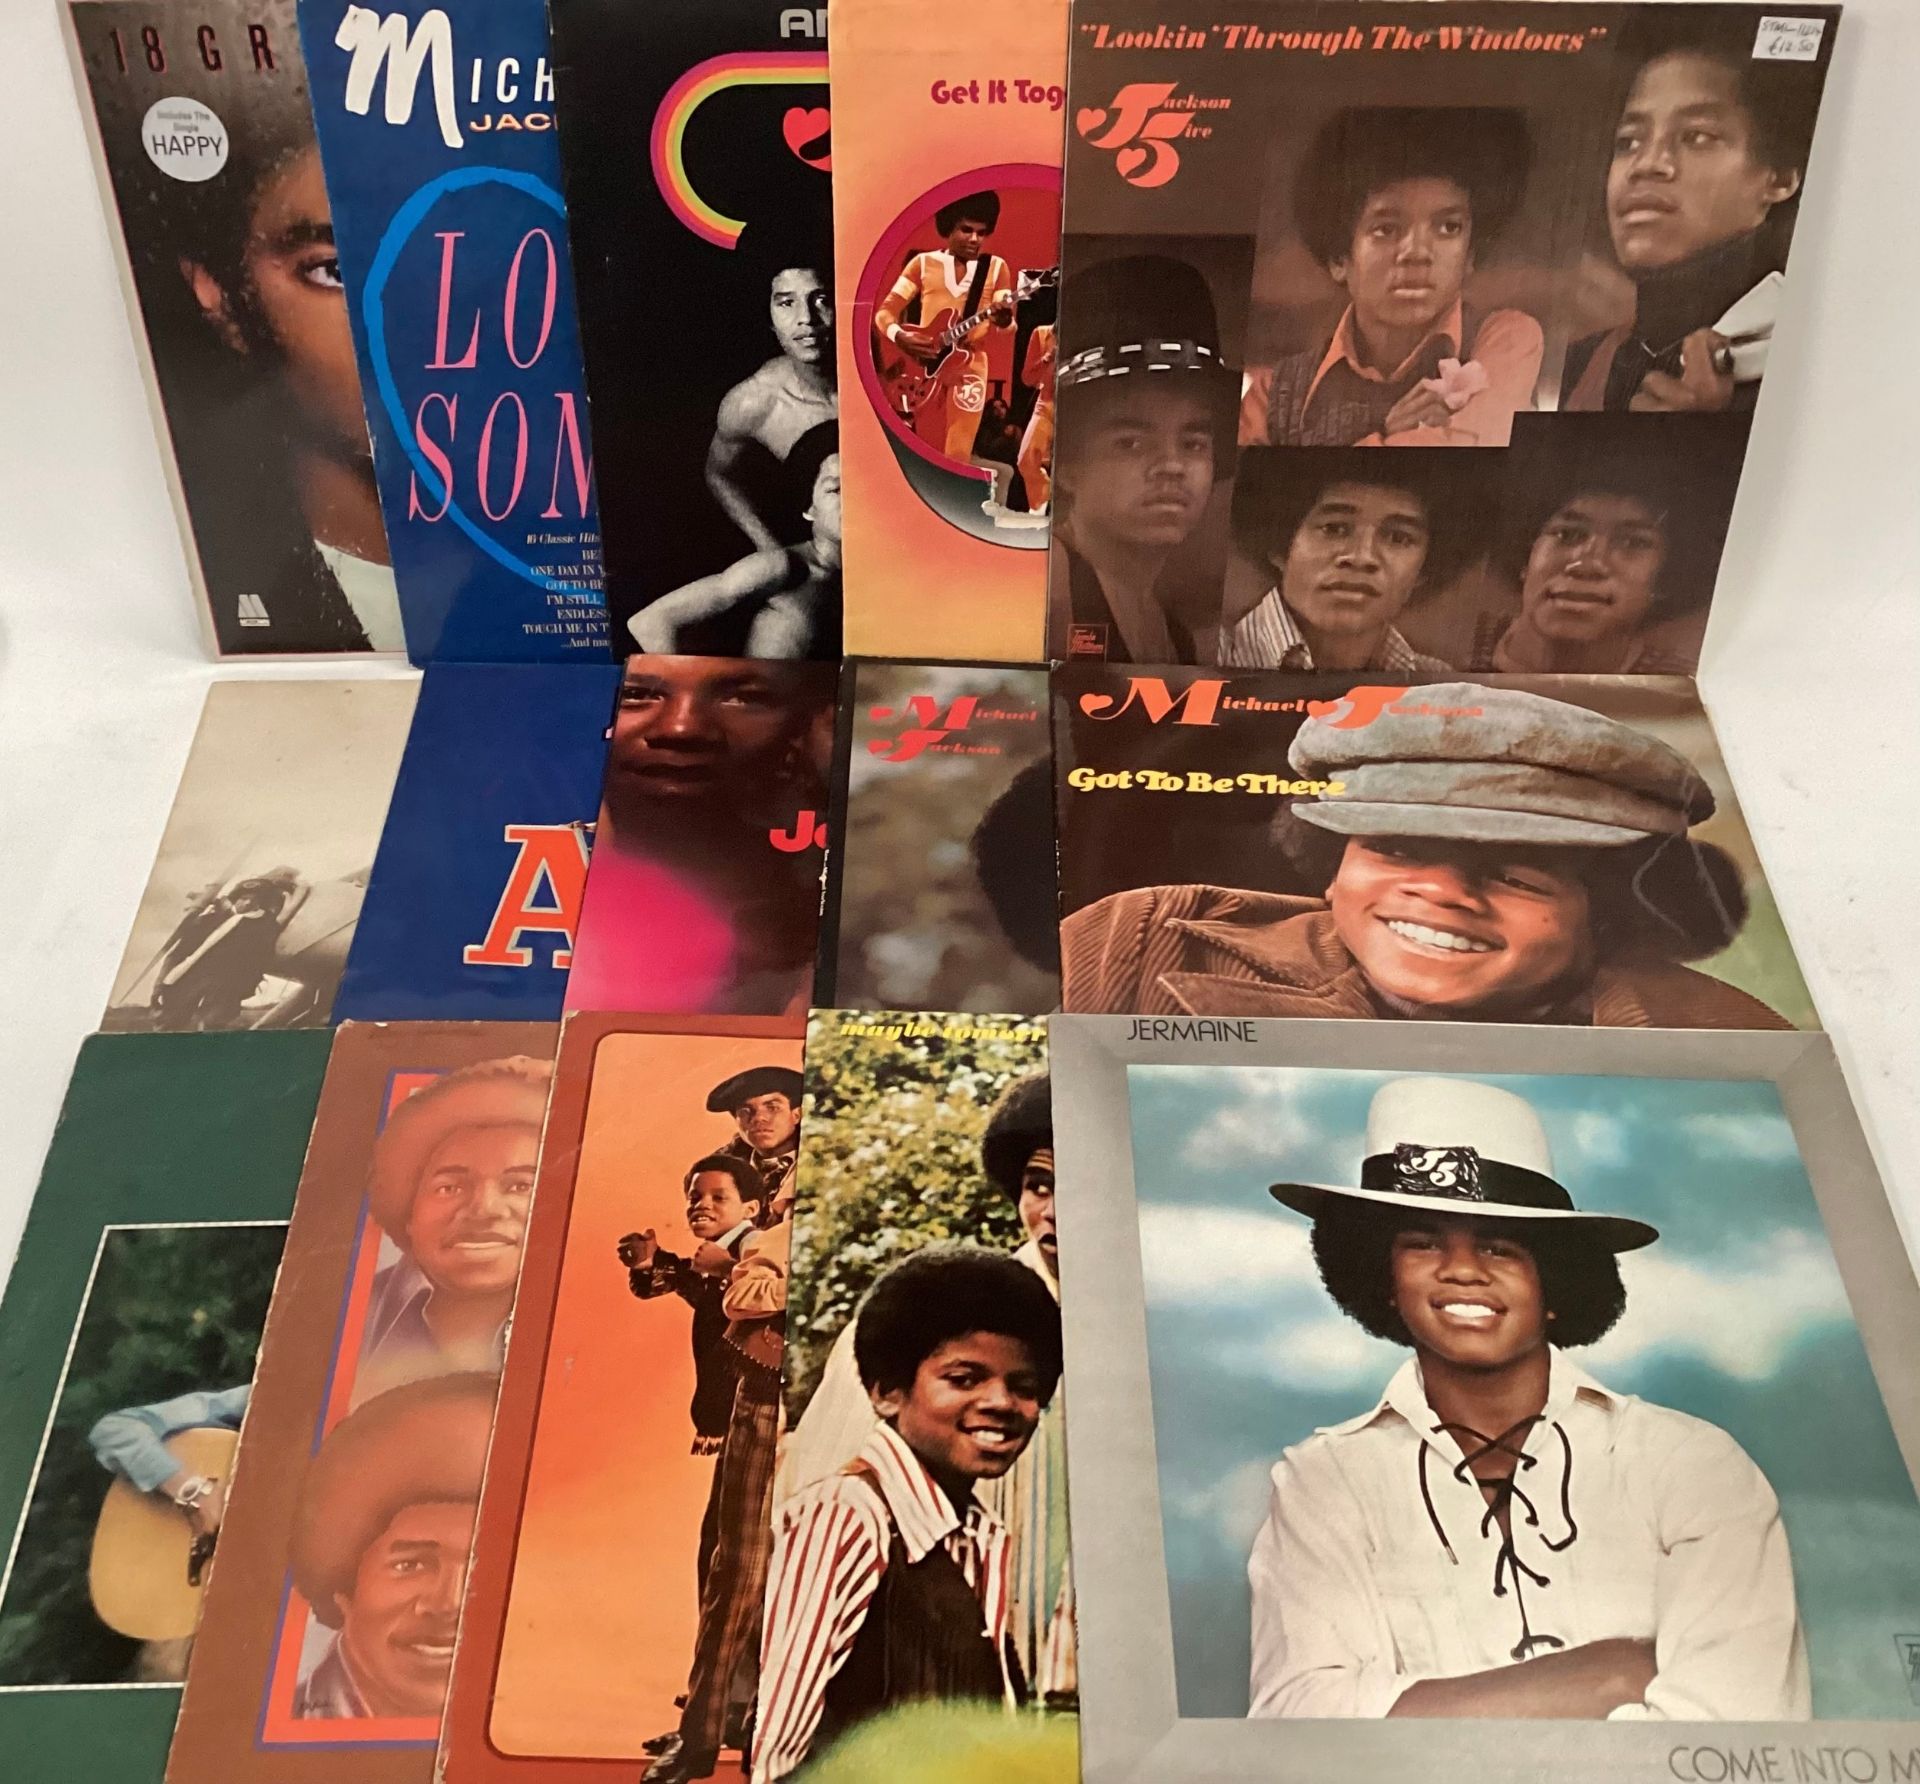 SELECTION OF THE JACKSONS VINYL RELATED ALBUMS. To include albums by - Michael Jackson - Jermaine